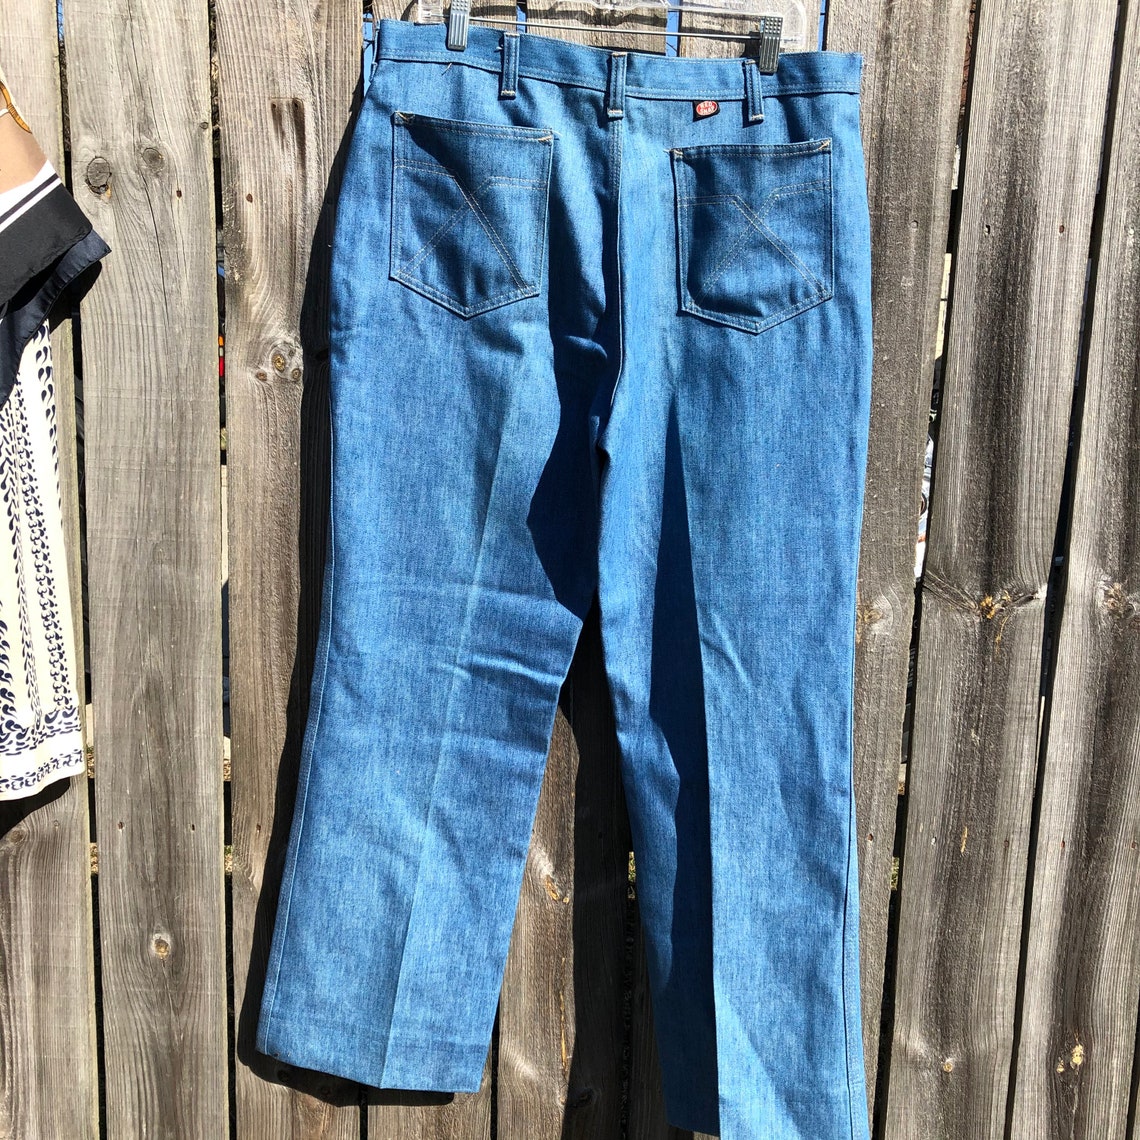 Deadstock Red Snap 1970s Jeans Great Details in Back Pockets. - Etsy